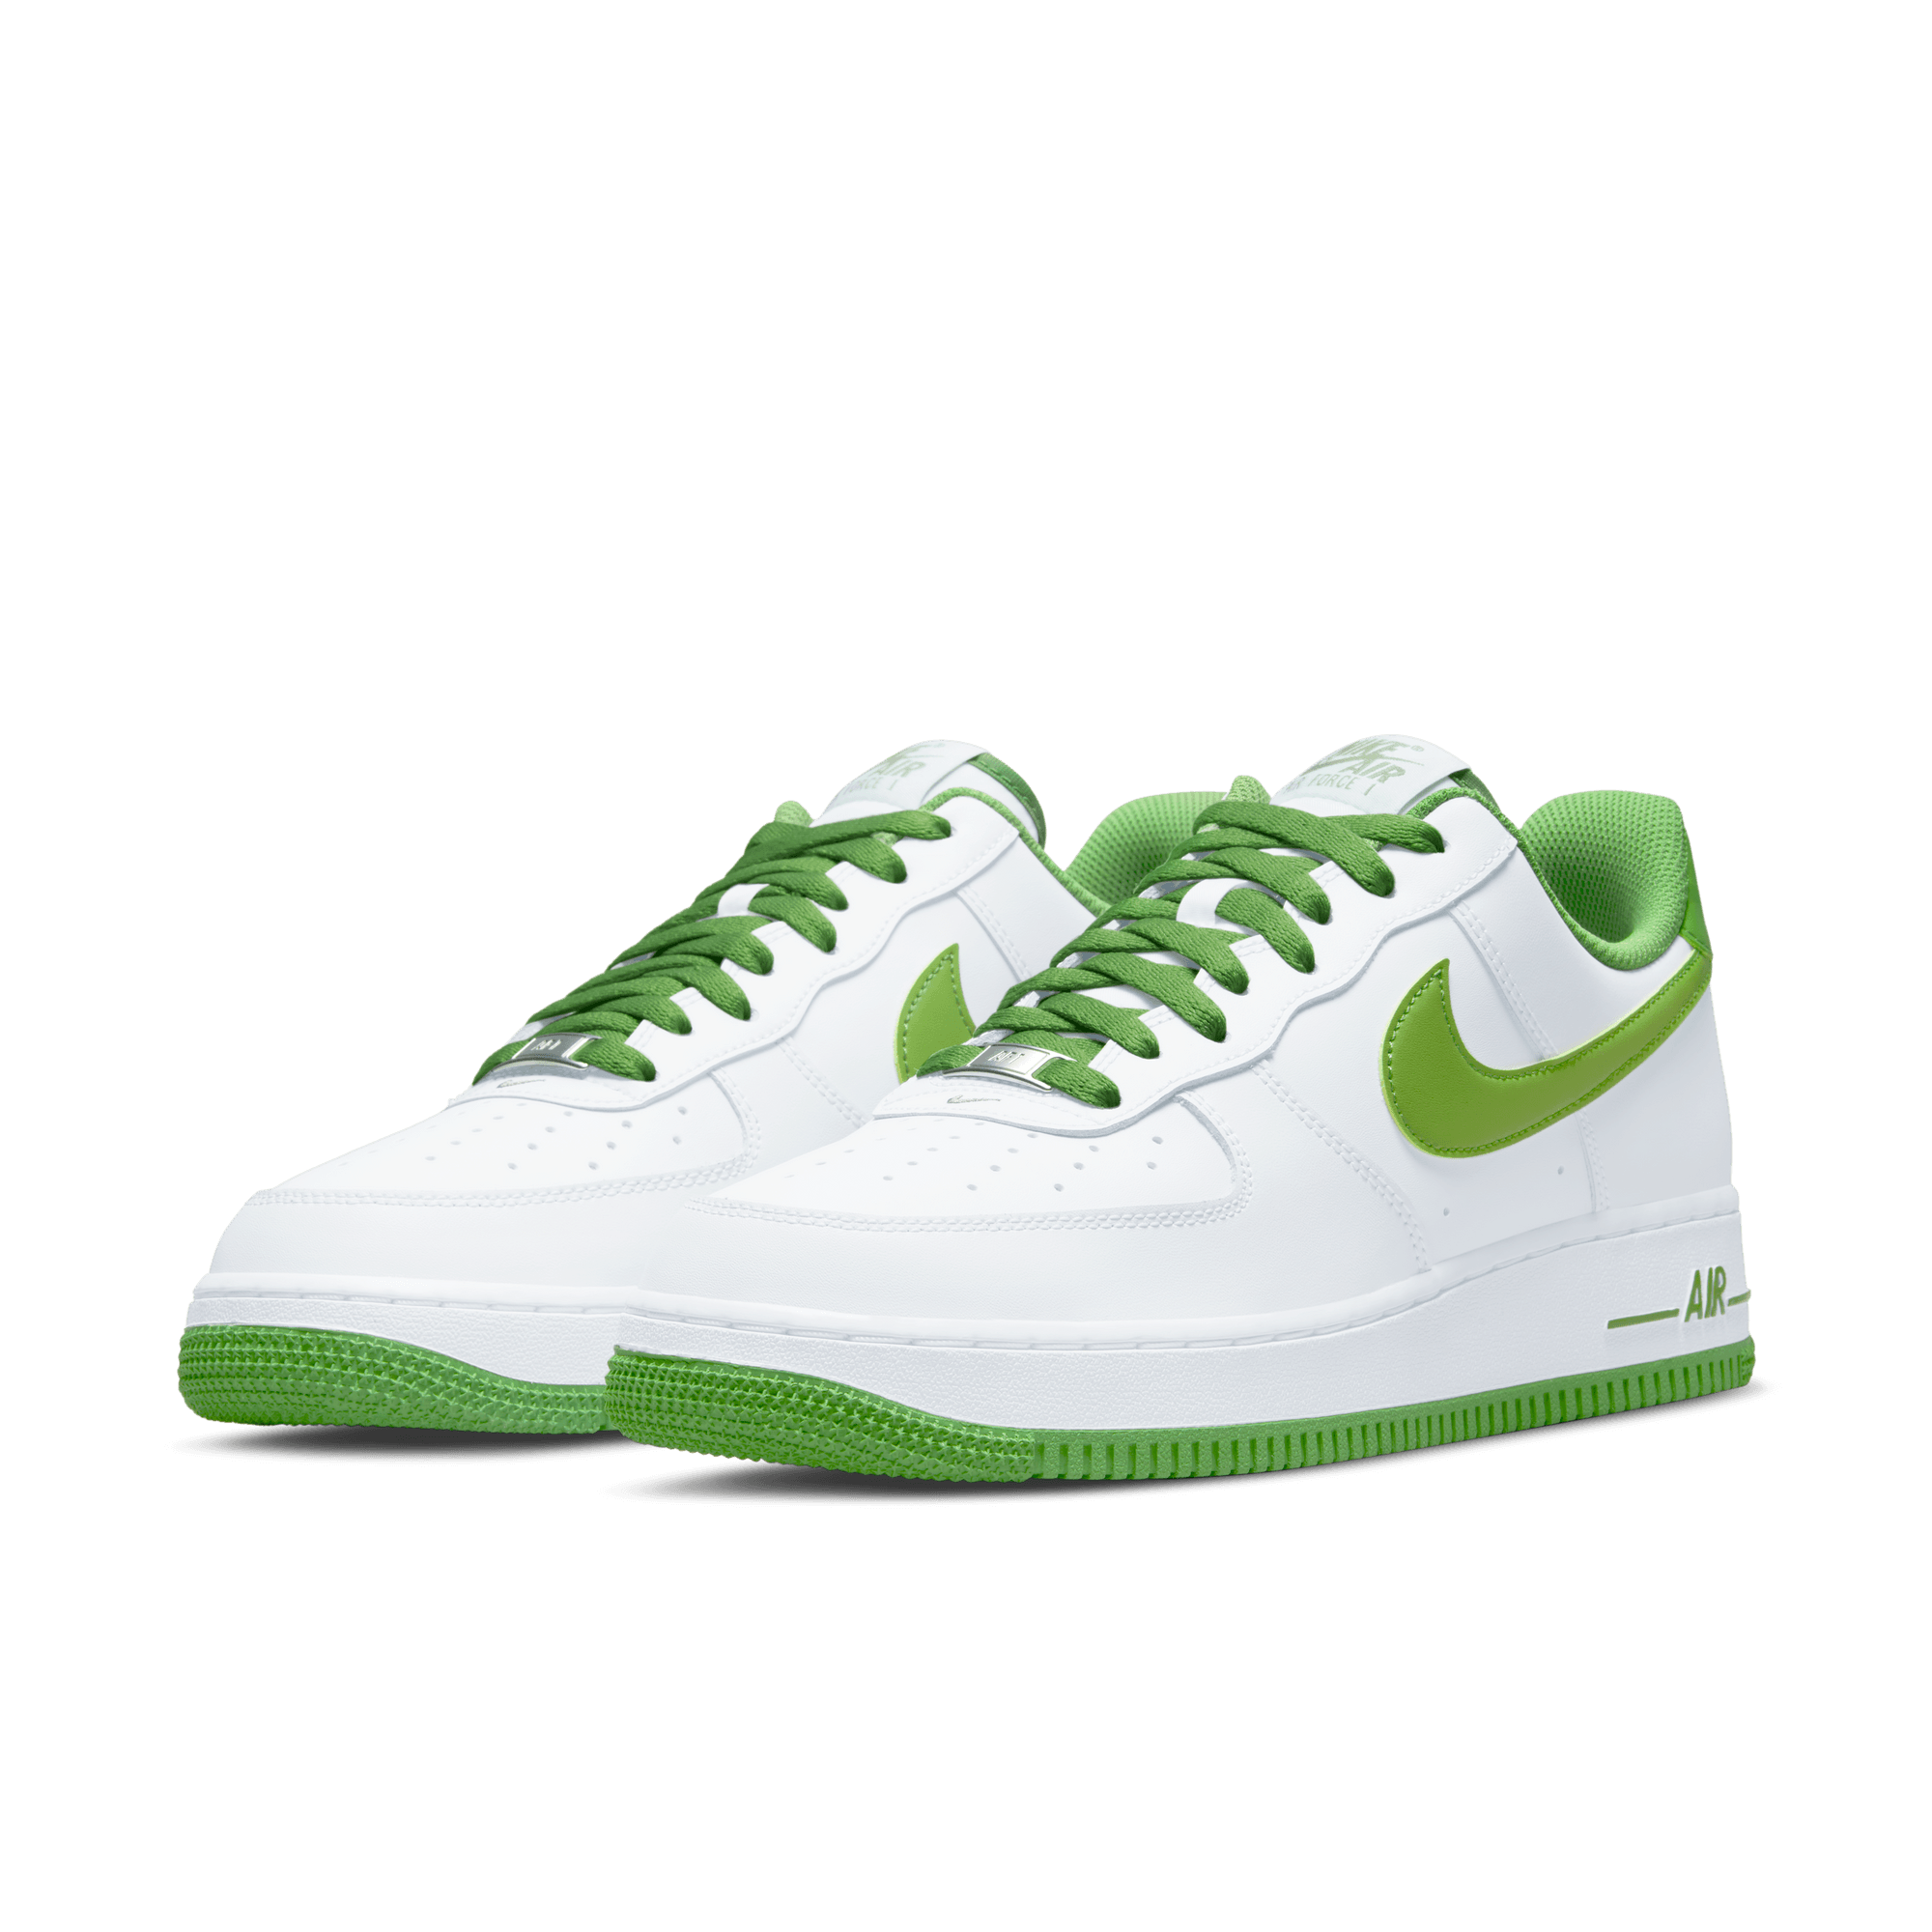 Nike Air Force 1 Mid QS - Men's - GBNY